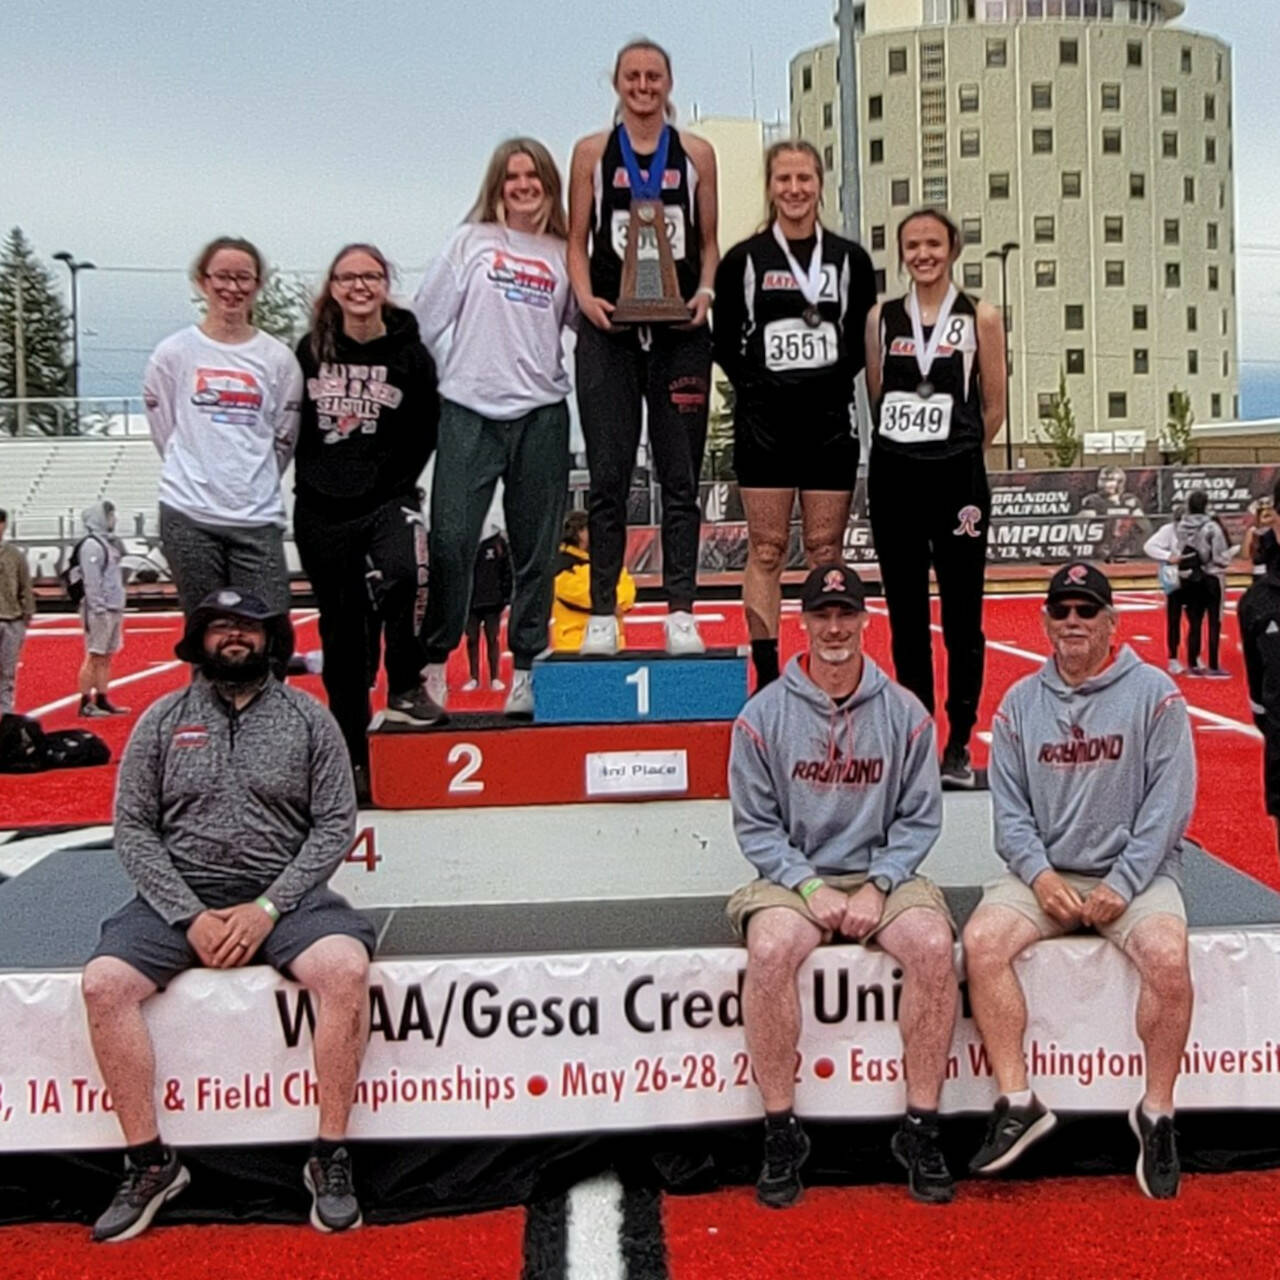 PHOTO COURTESY OF RAYMOND ATHLETICS The Raymond girls track and field team pose with their third-place trophy at the conclusion of the WIAA 2B State Track and Field Championships on Saturday at Eastern Washington University in Cheney.